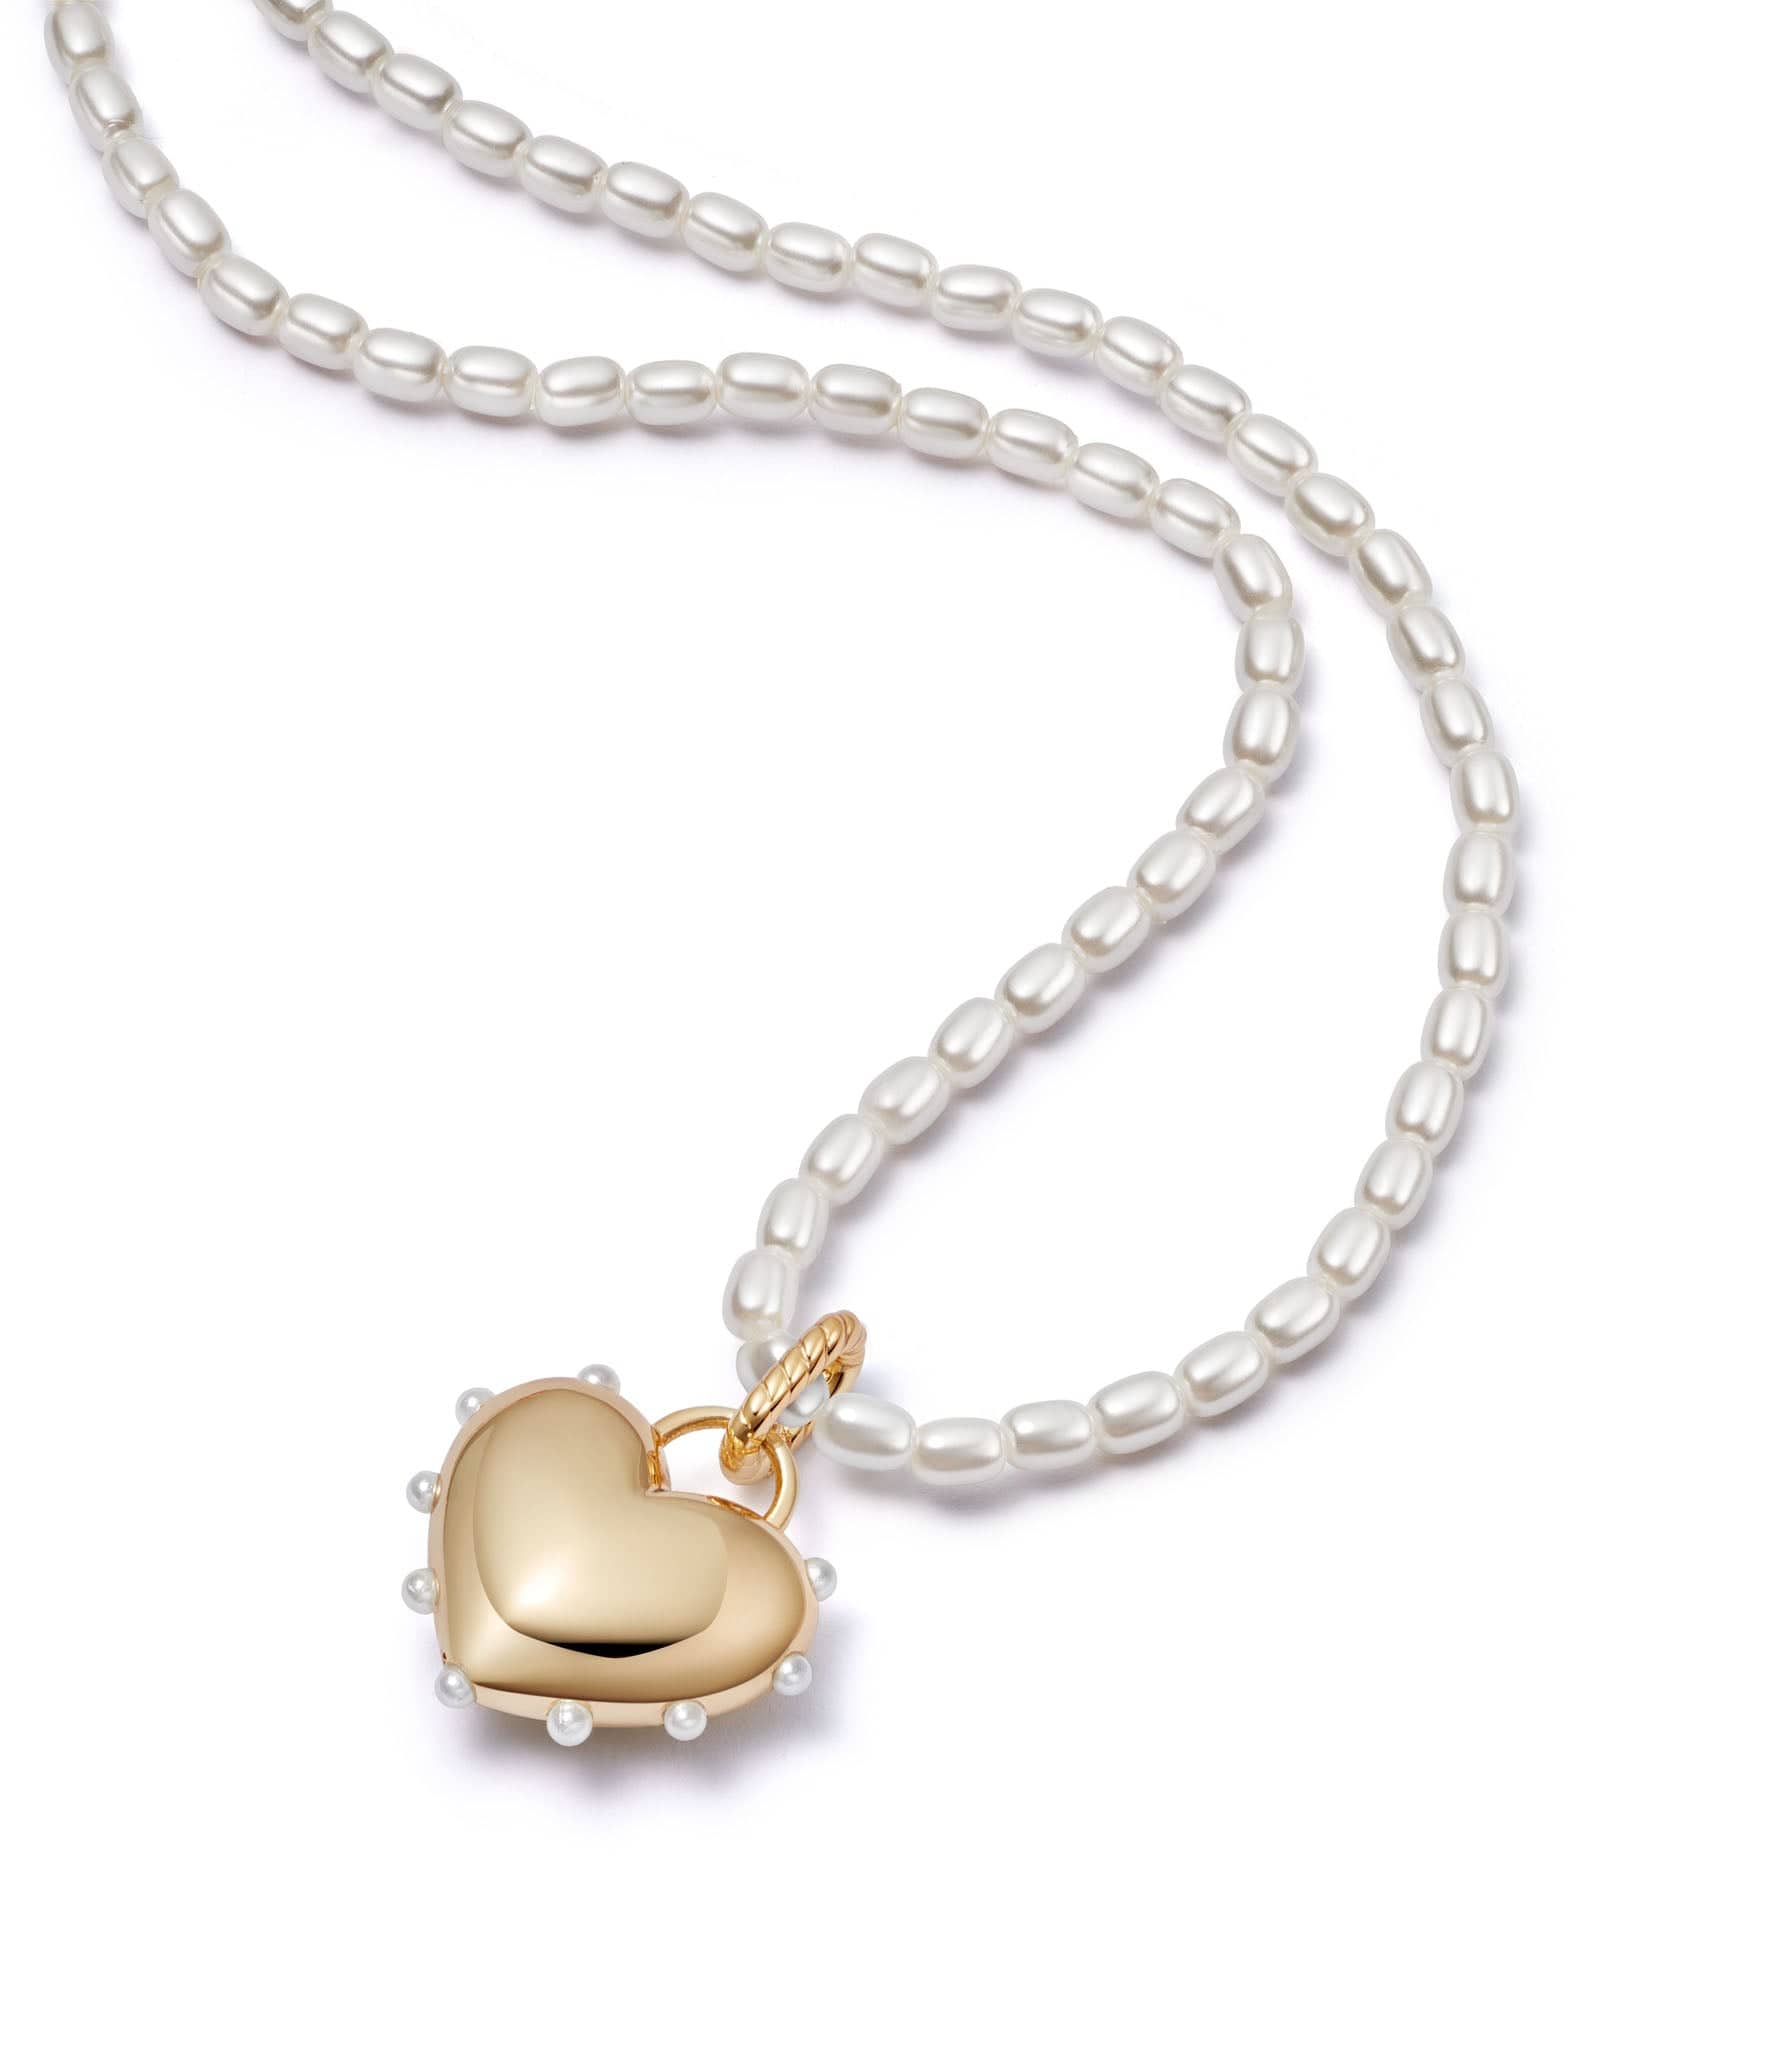 Daisy London + Shrimps Chubby Heart Pearl Necklace in 18ct Gold Plate